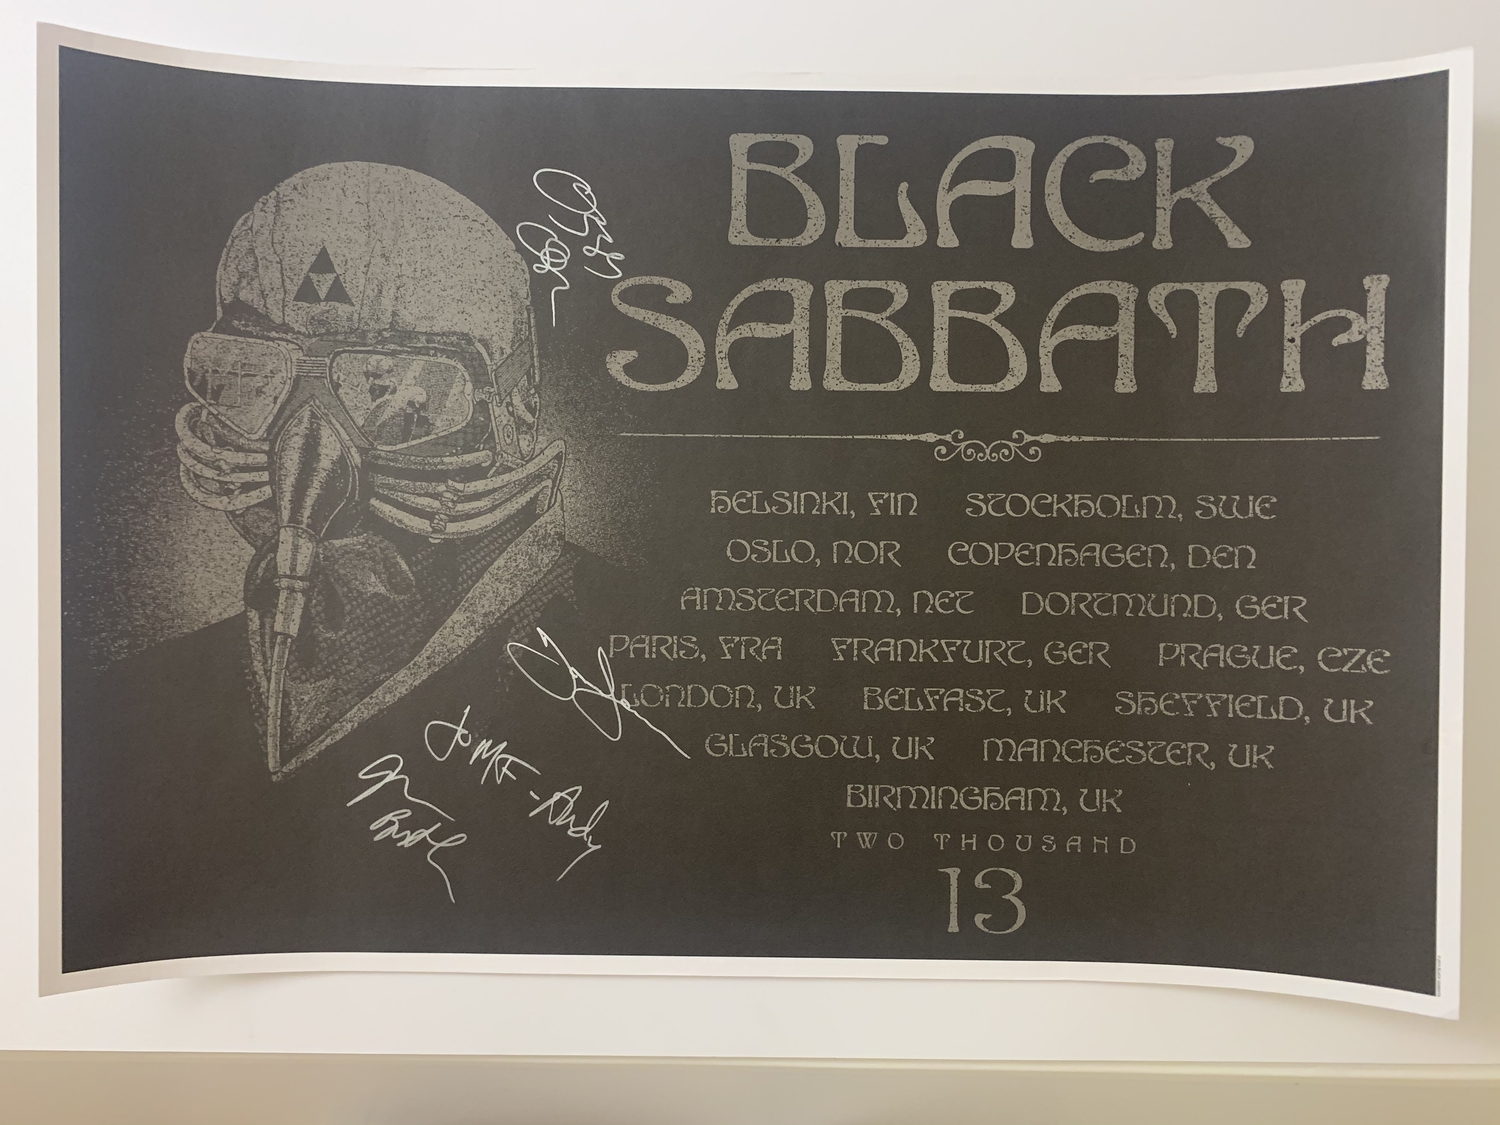 Black Sabbath - 2013 European Tour Poster - Signed and Personalized by Black Sabbath